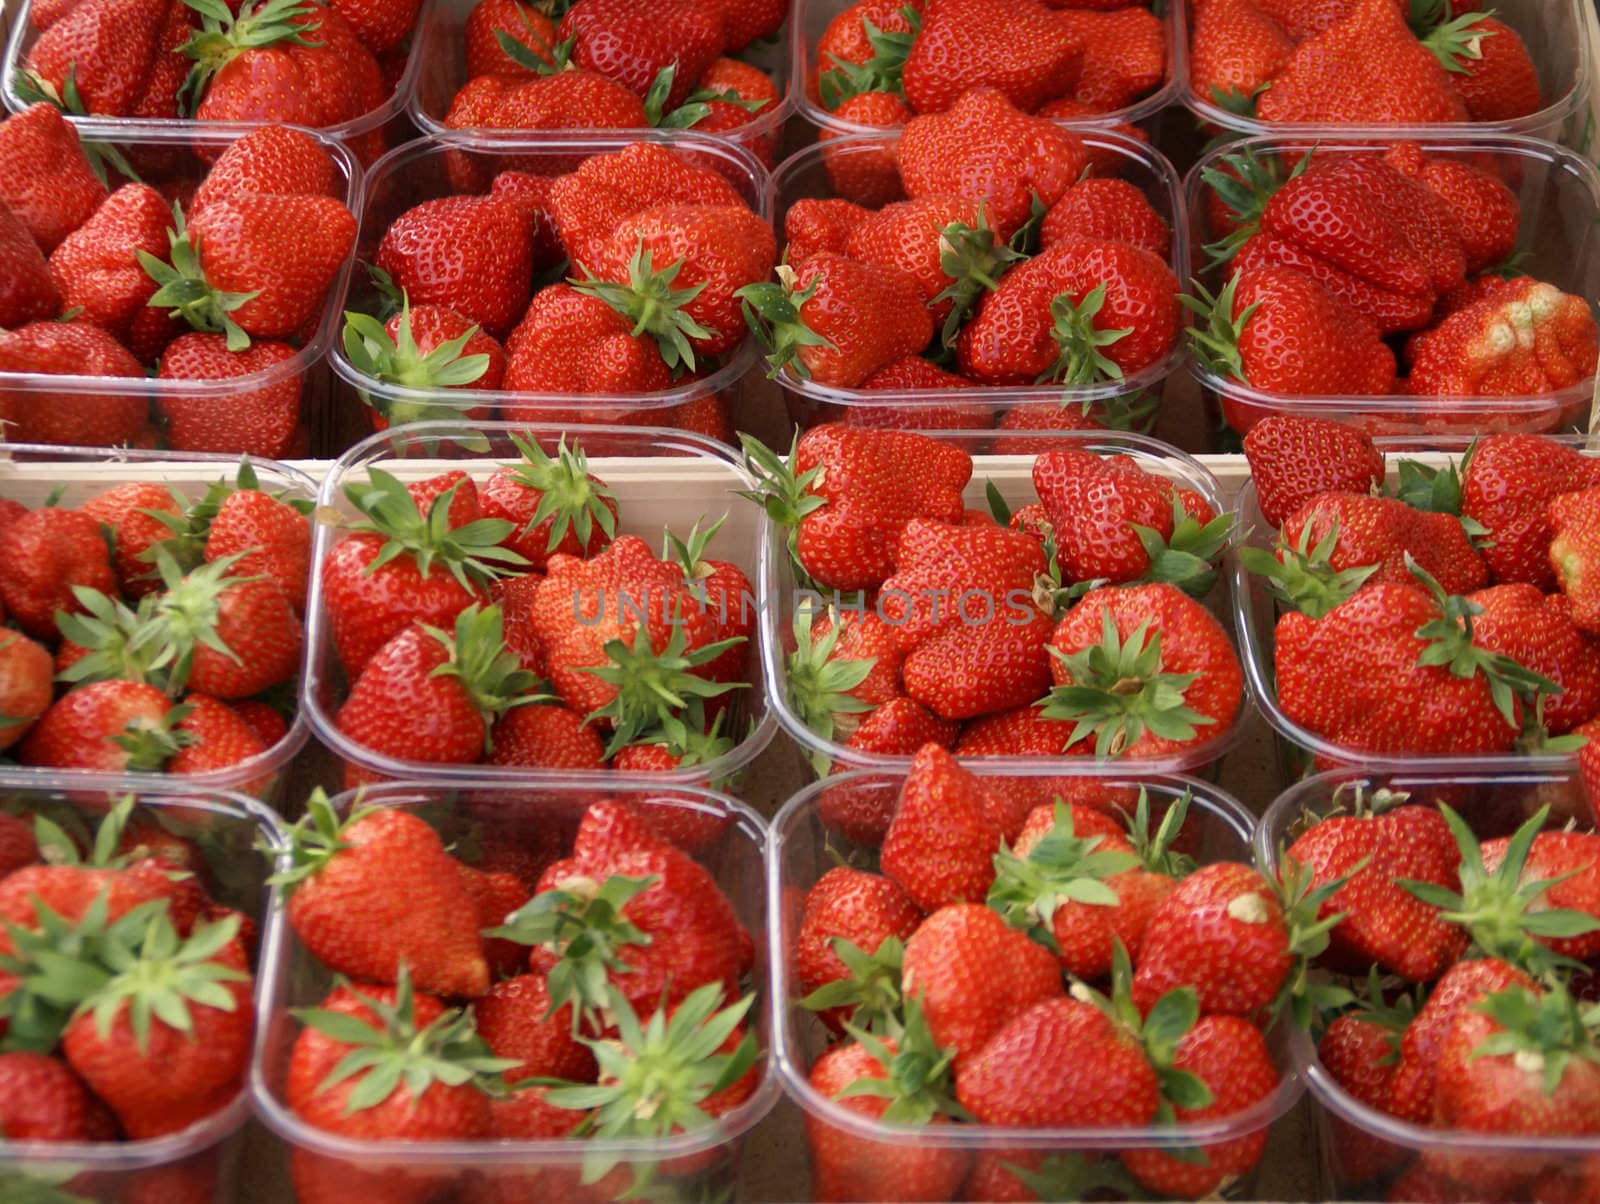 Strawberries in container by Claudine